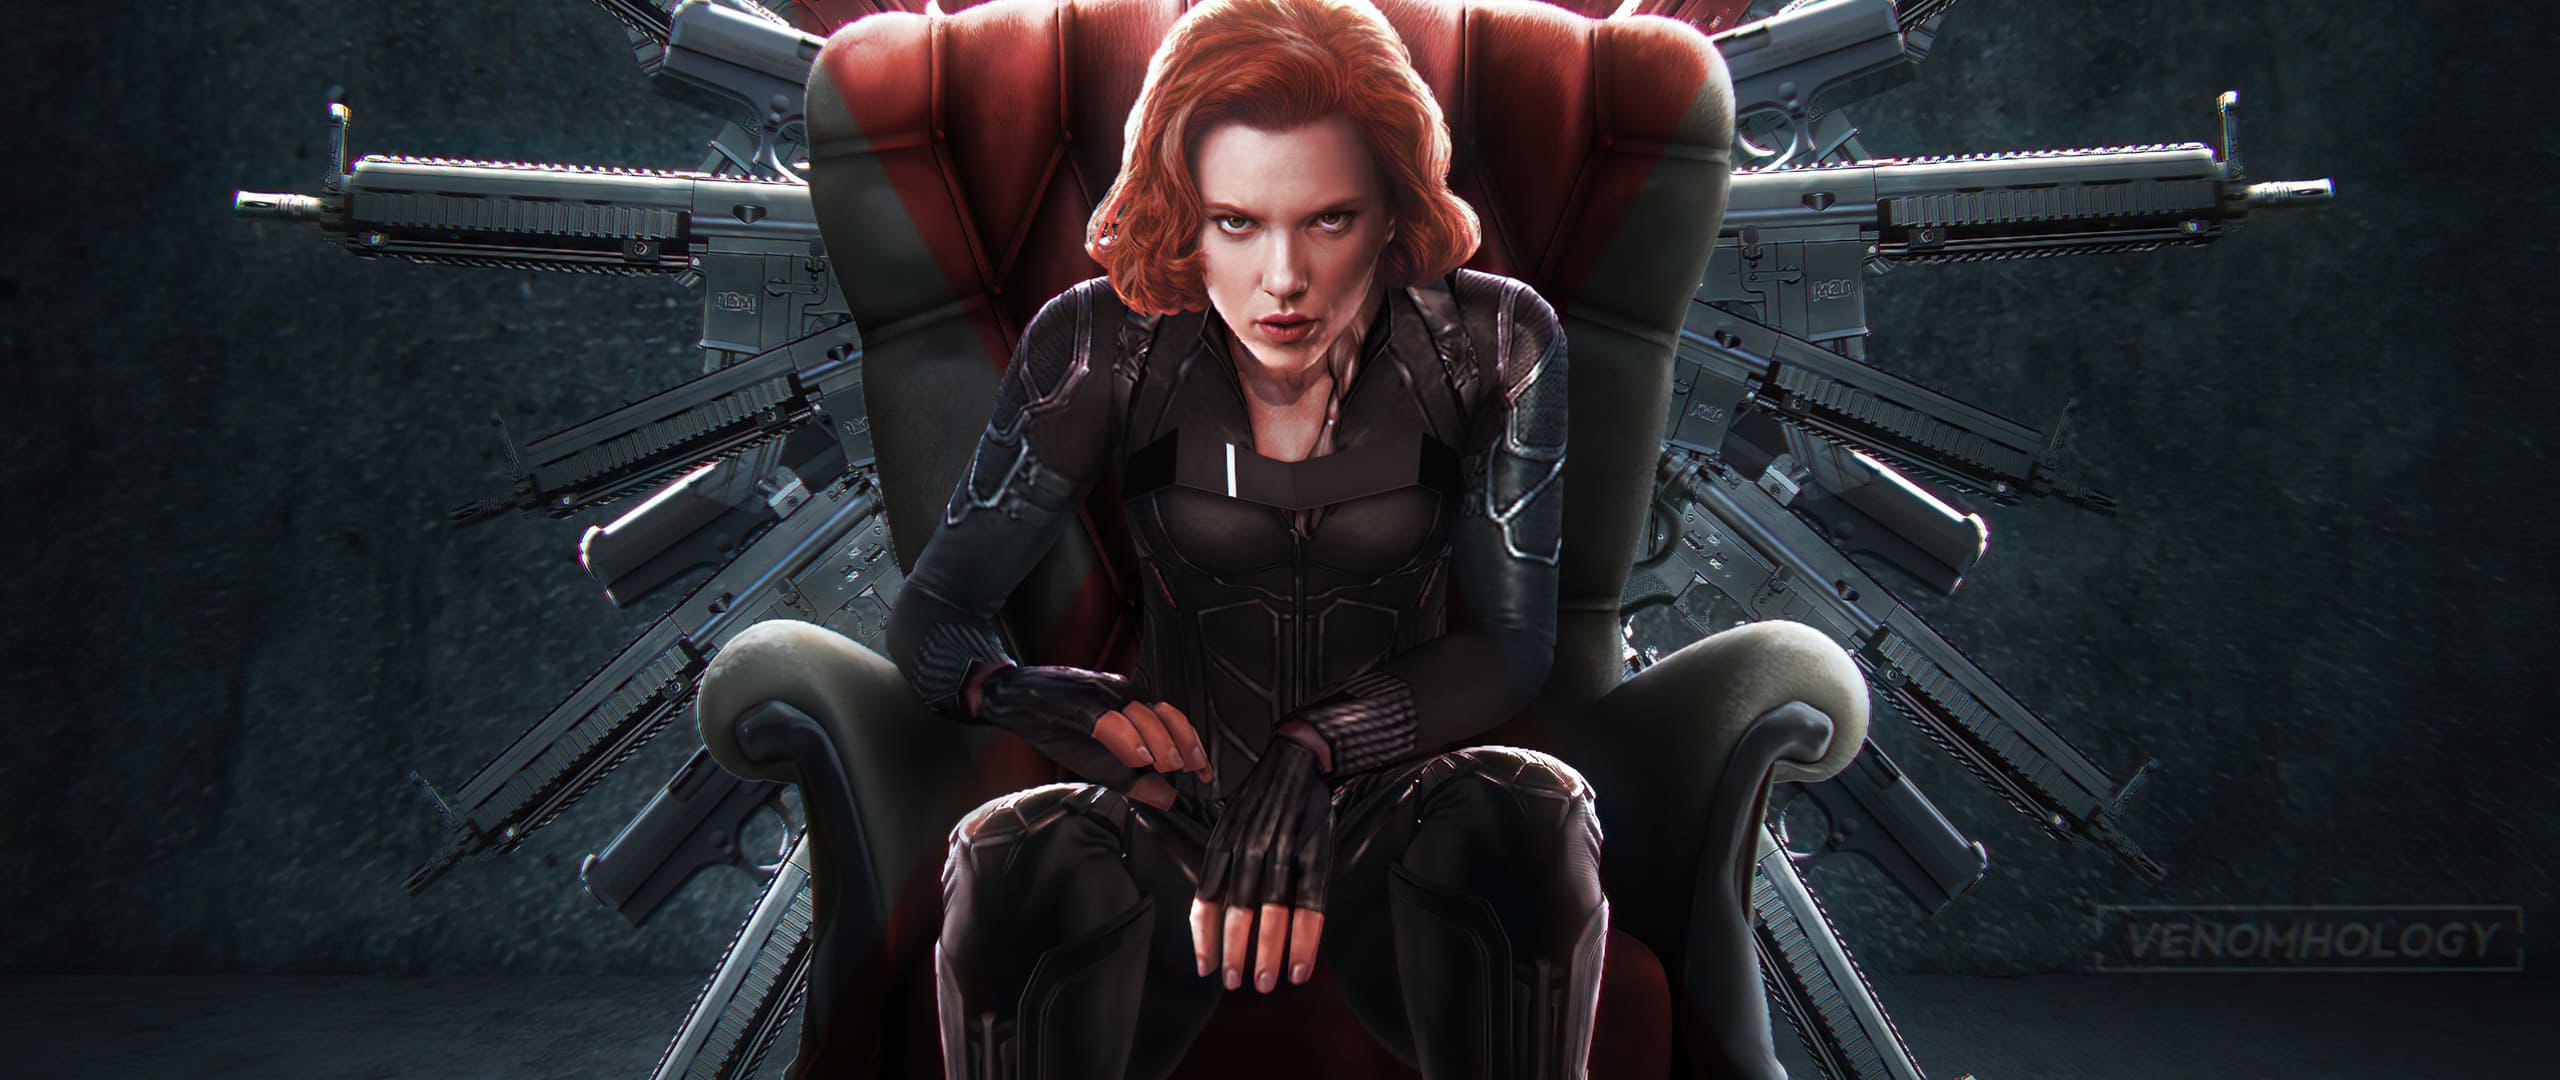 Black Widow Computer Background to Download Full Size Computer Background